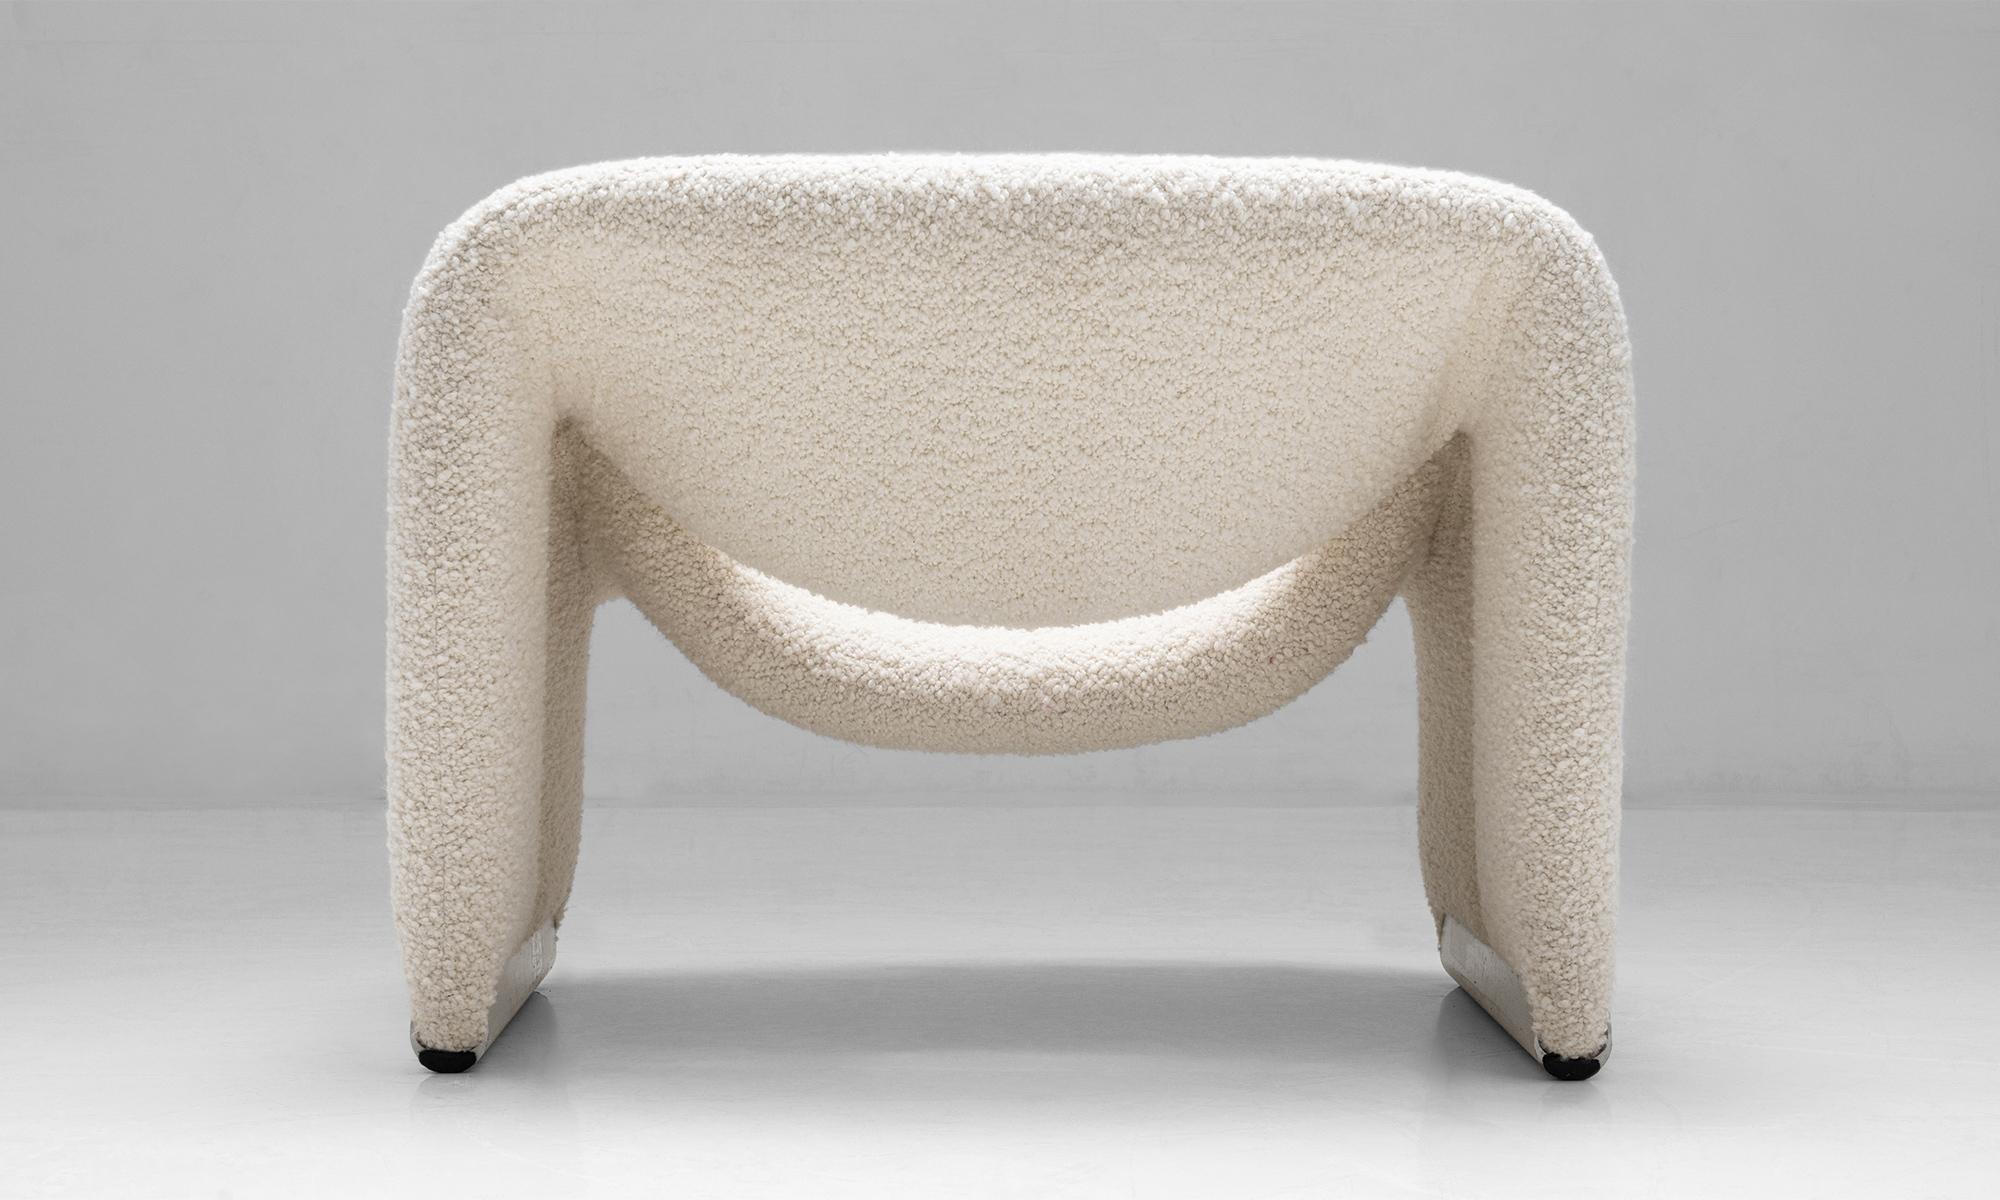 Pair of groovy M-chairs by Pierre Paulin.

Netherlands, Circa 1970.

Beautiful pair of chairs in Creme Wool Boucle, produced by Artifort.

Measures: 33”W X 25.25”D X 25.5”H x 14.5”seat.